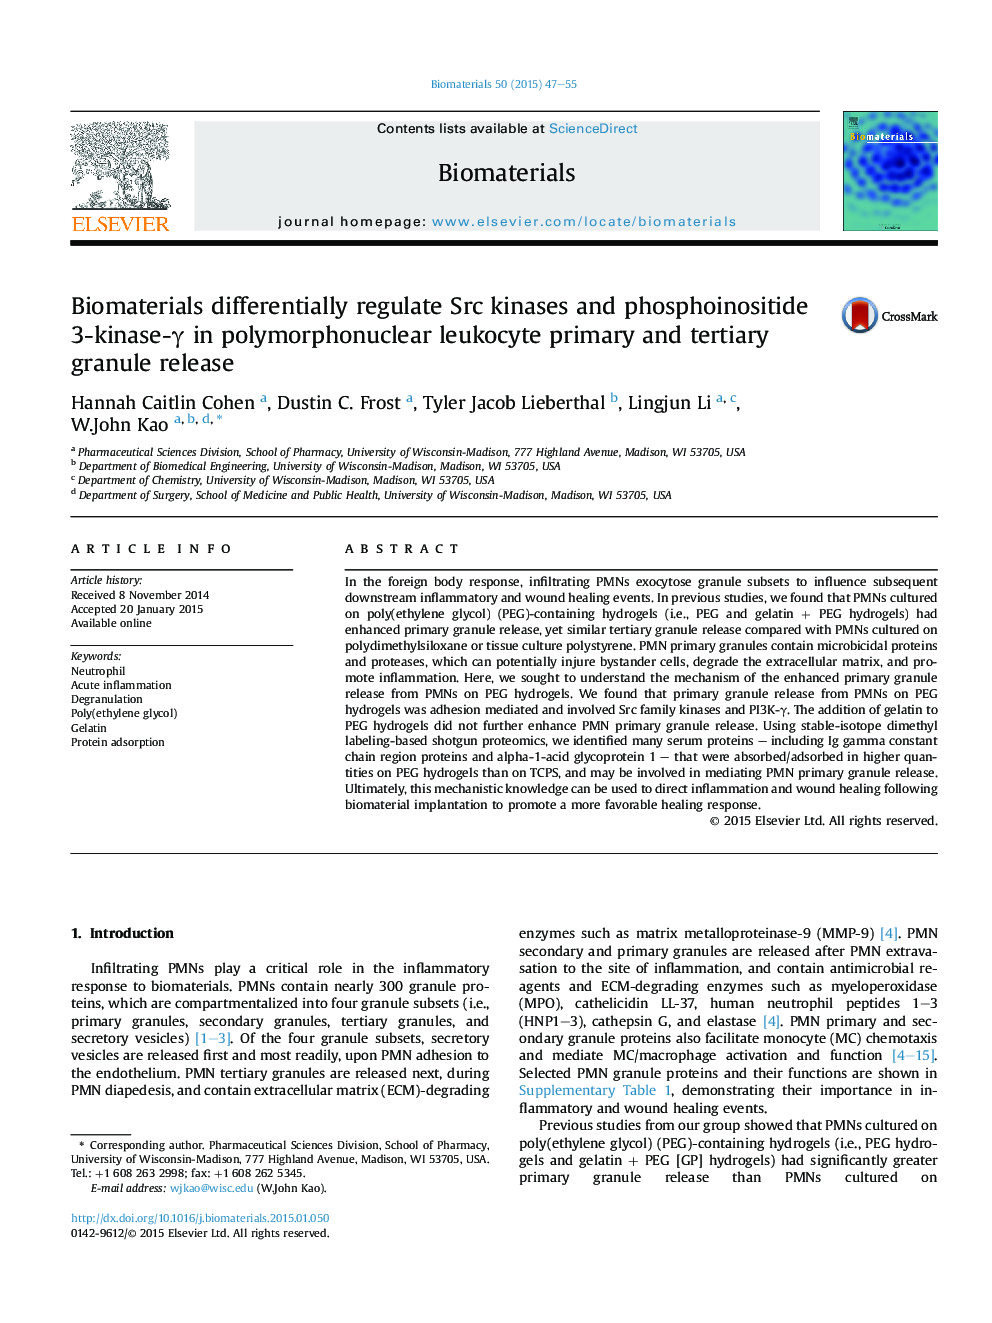 Biomaterials differentially regulate Src kinases and phosphoinositide 3-kinase-Î³ in polymorphonuclear leukocyte primary and tertiary granule release